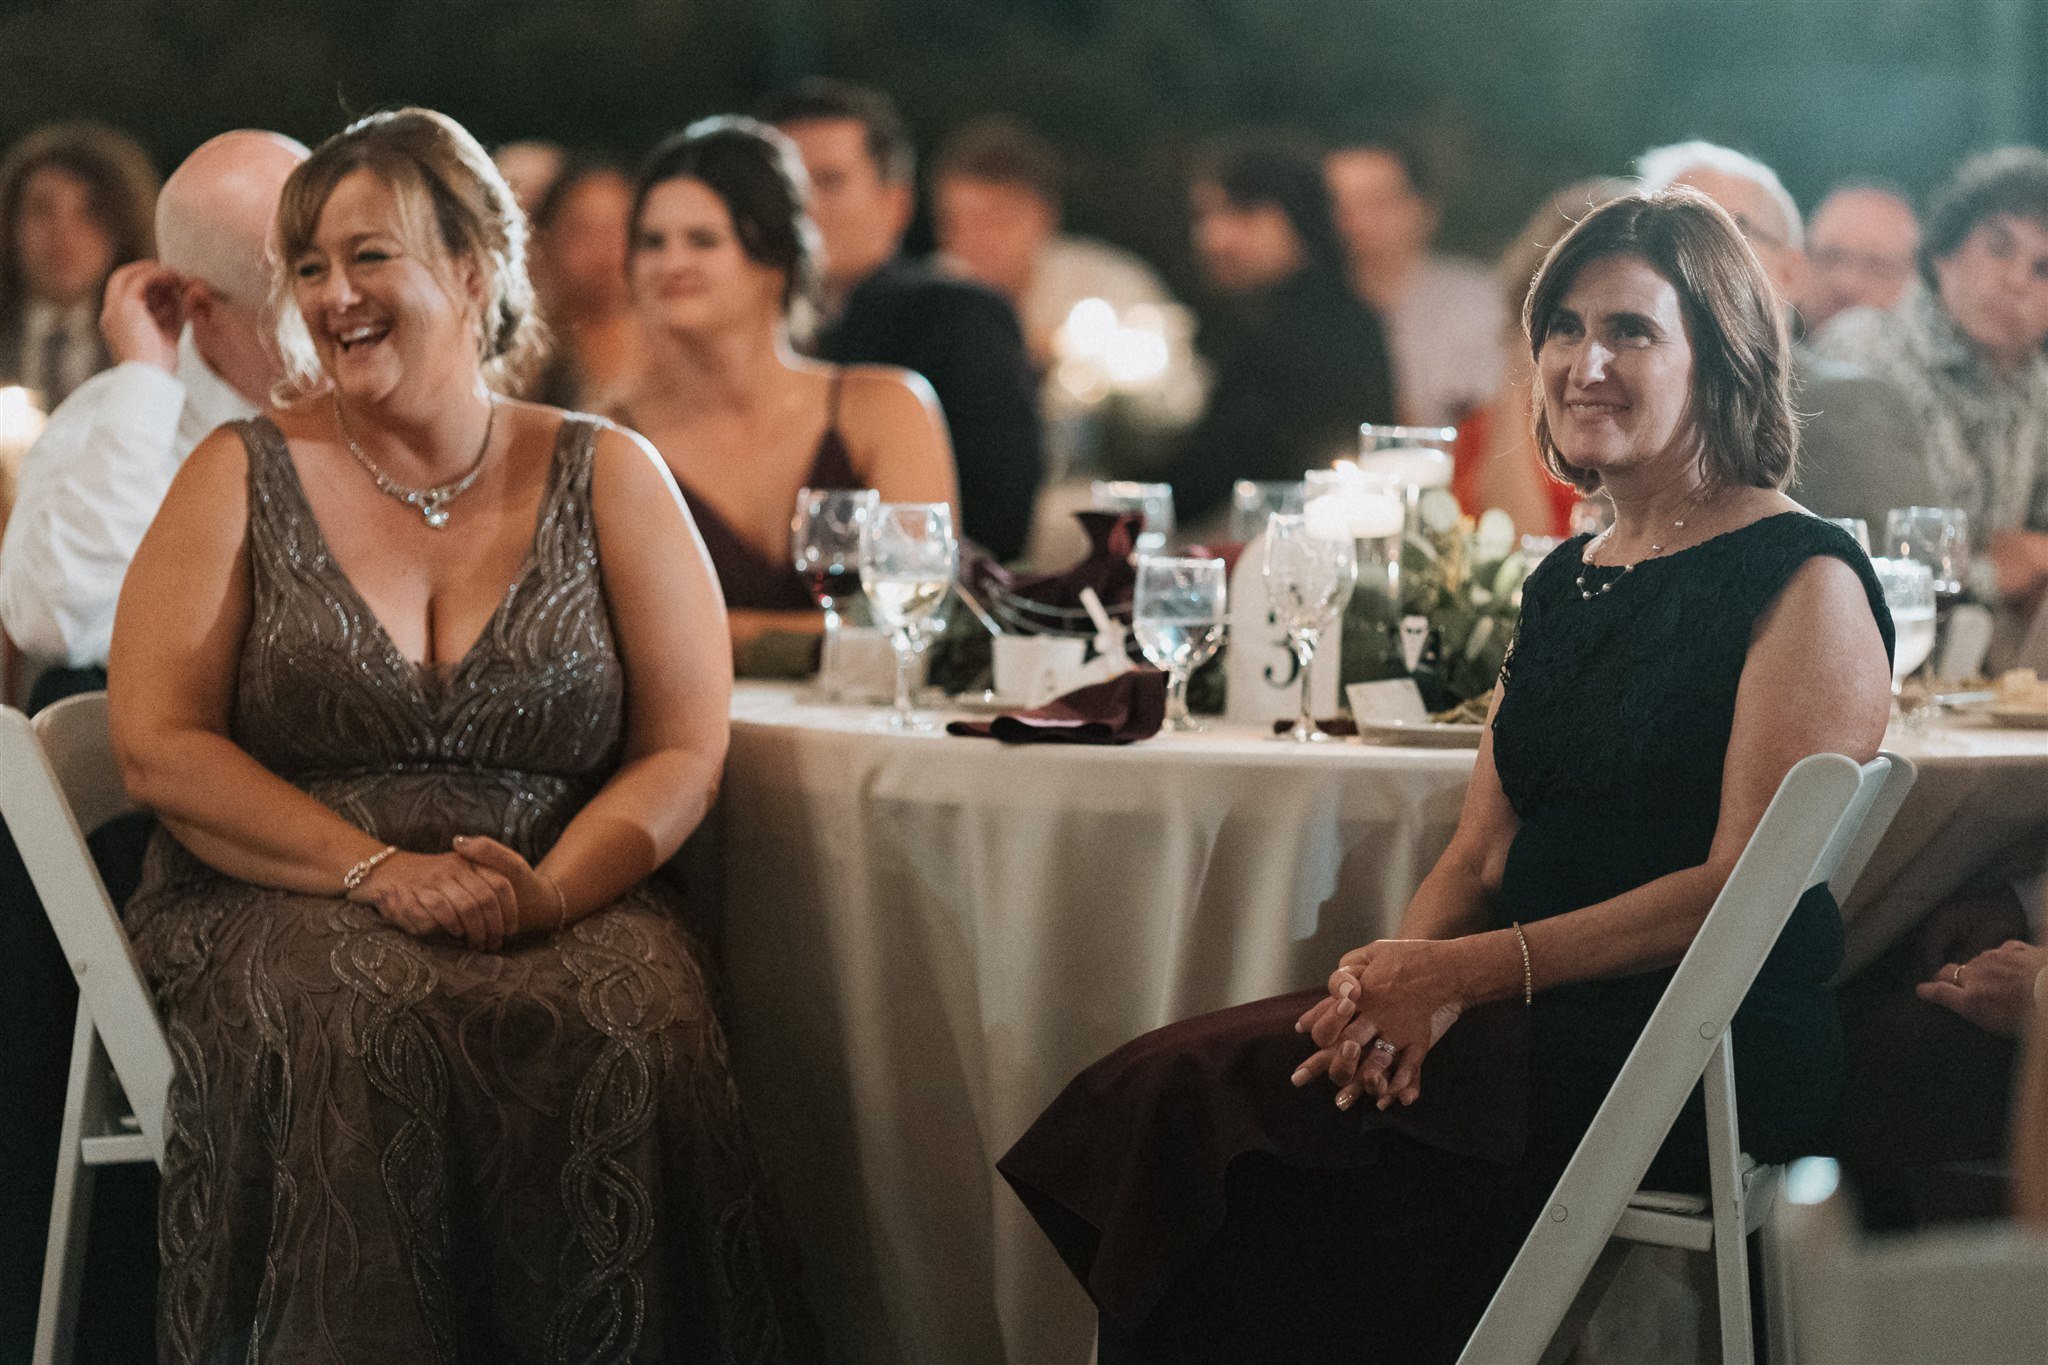 mother of the bride and mother of the groom candid